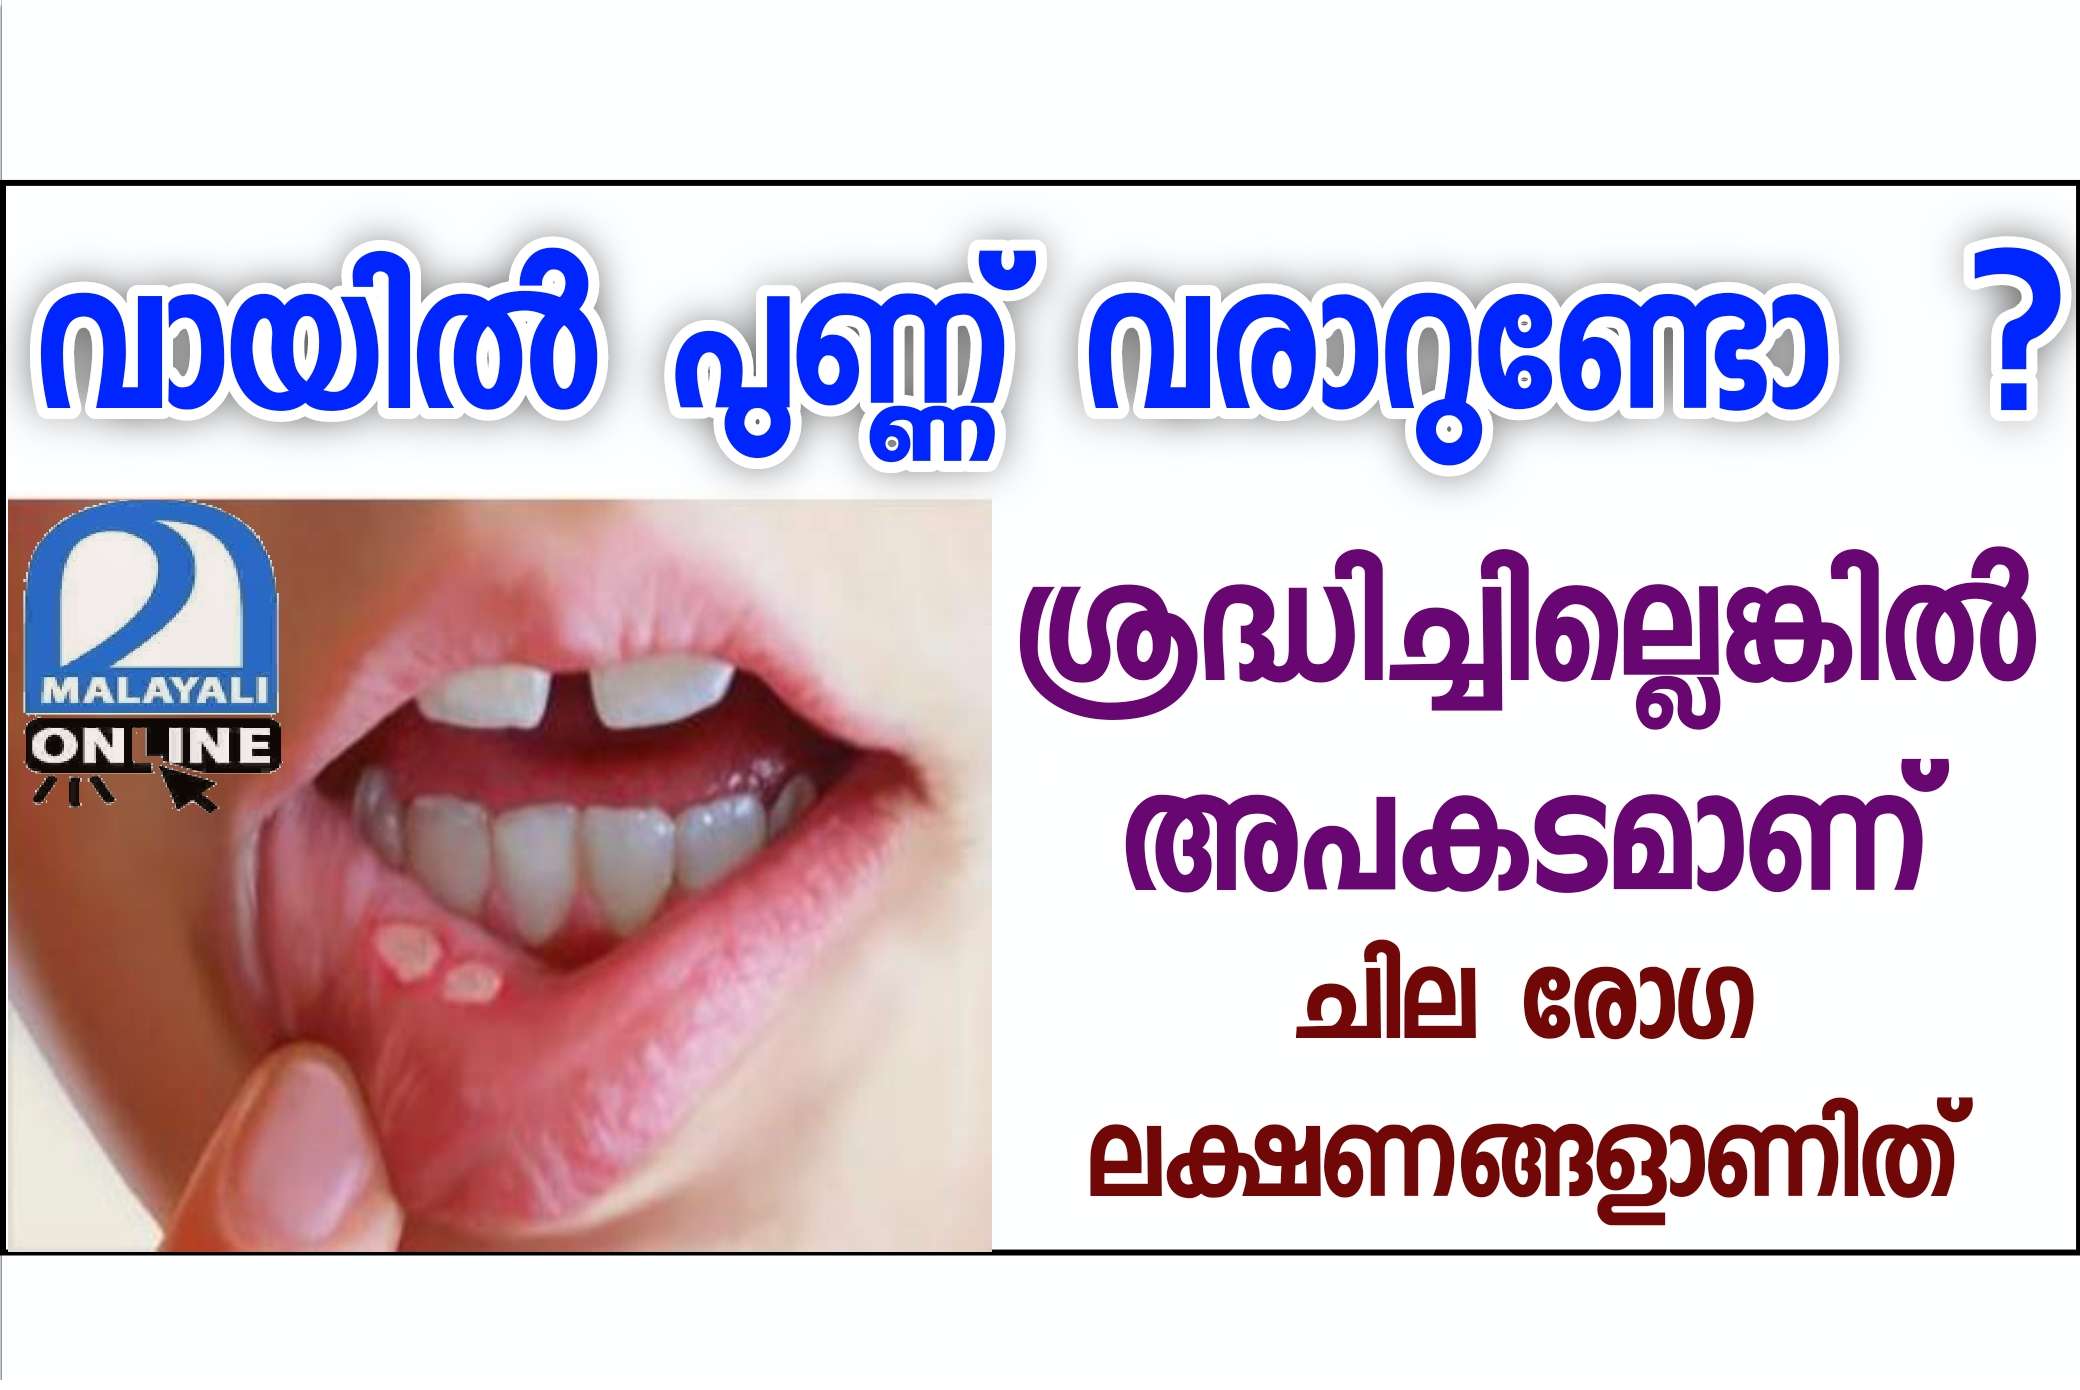 Main causes of mouth ulcers